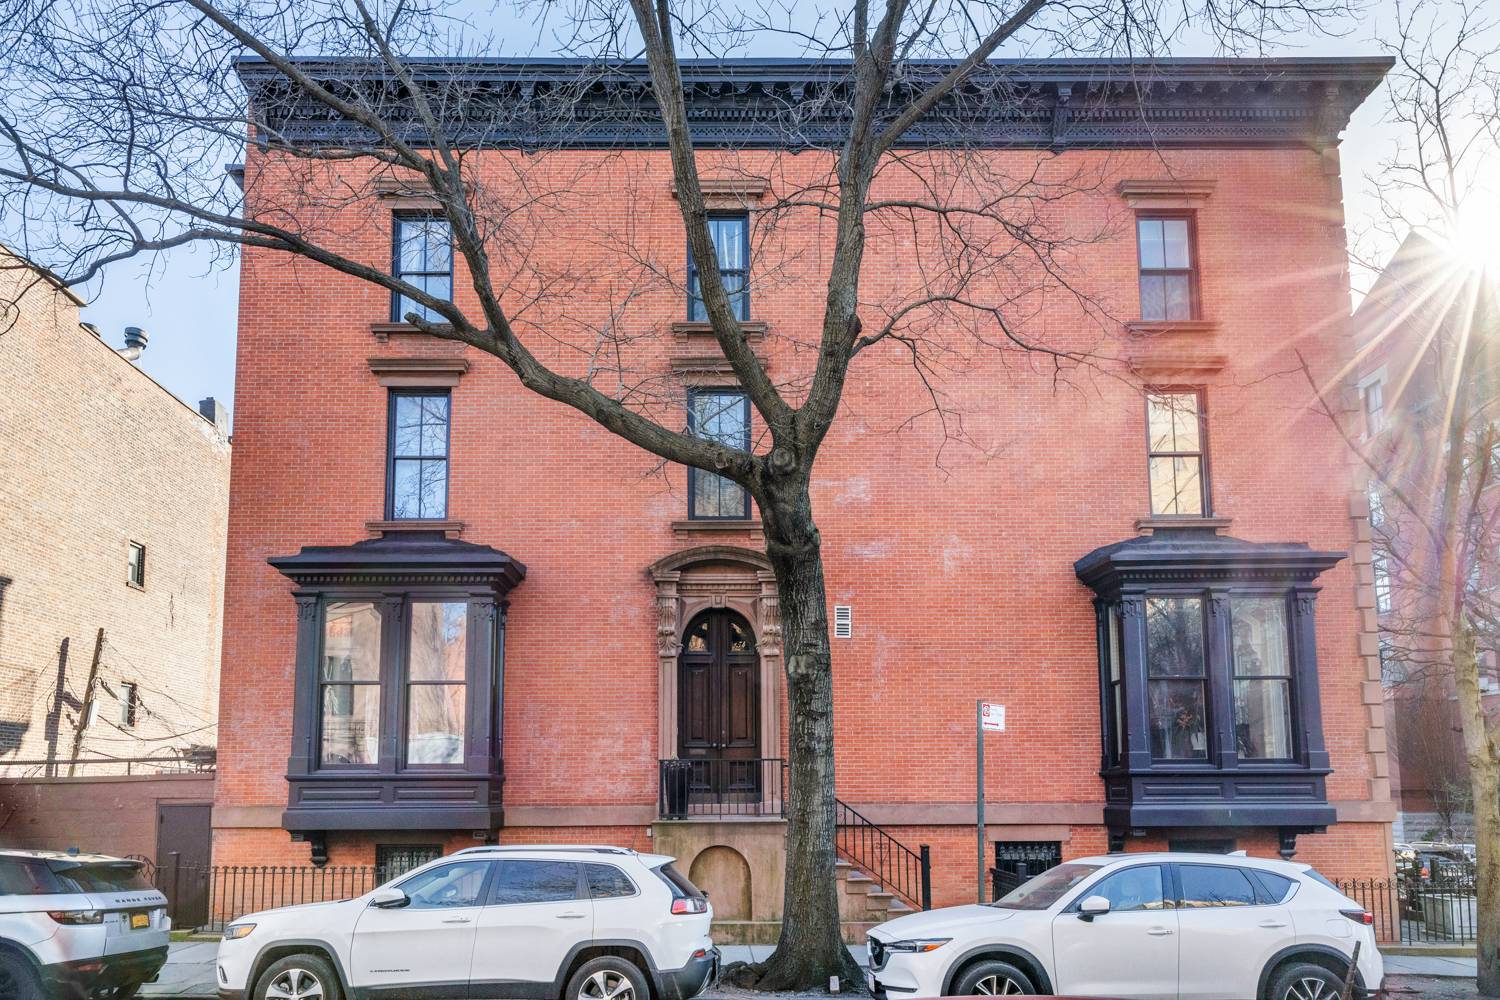 Perfectly positioned on a corner lot with bluestone walkway around, this beautiful Cobble Hill townhouse is filled with gorgeous original details throughout.